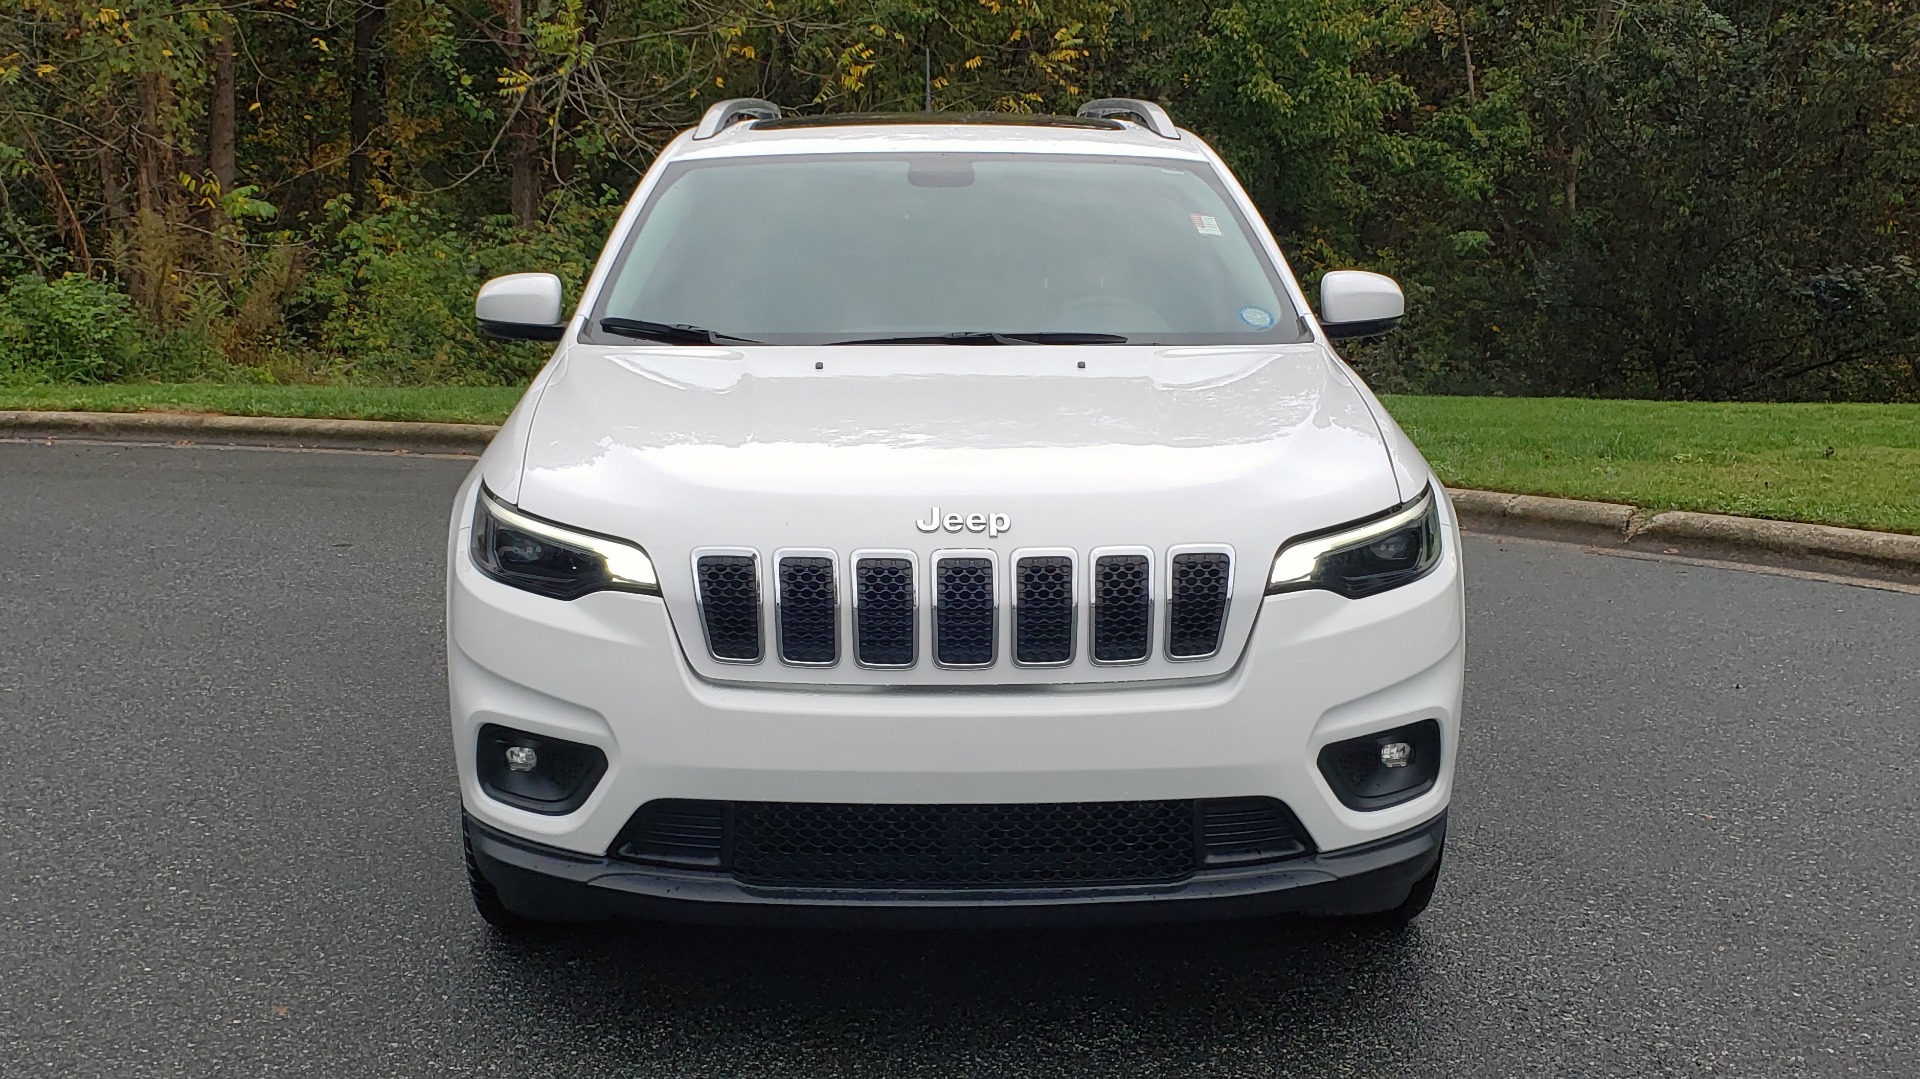 Used 2019 Jeep CHEROKEE LATITUDE PLUS FWD / CLD WTHR / HTD STS / BLIND SPOT / PRK ASST for sale Sold at Formula Imports in Charlotte NC 28227 21